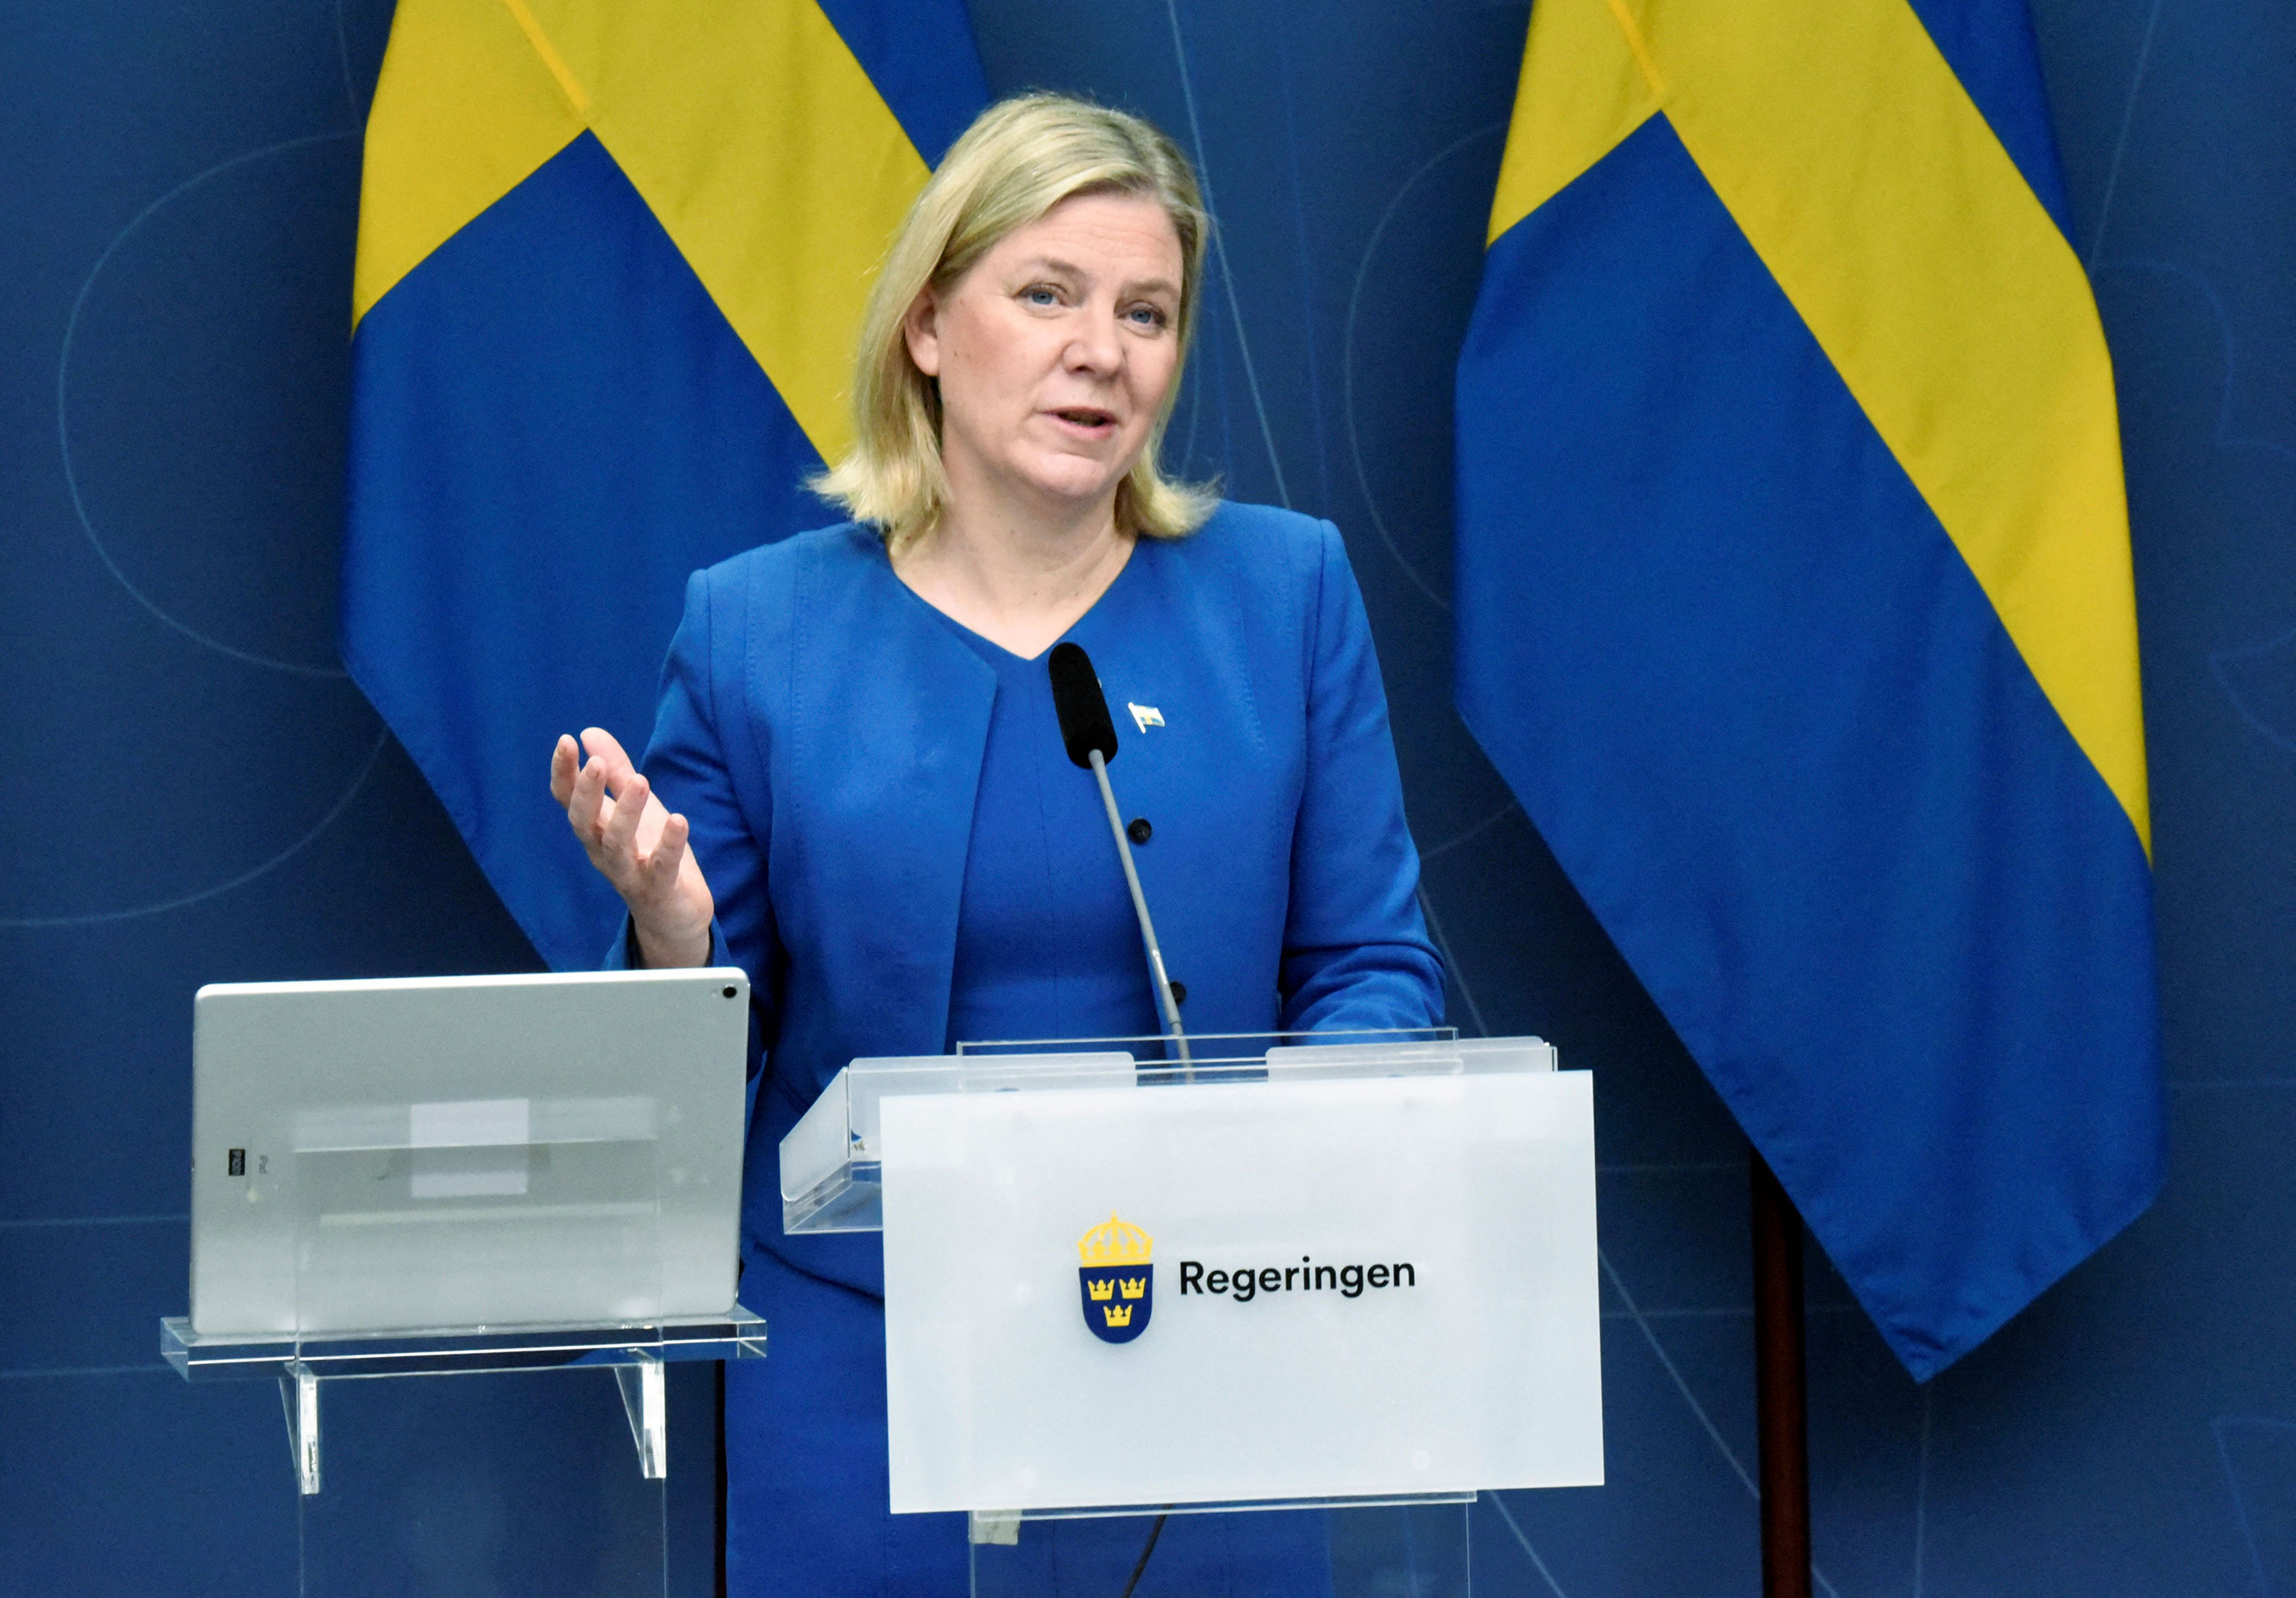 Sweden's Prime Minister Magdalena Andersson speaks on Thursday at a press conference  in Stockholm regarding the lifting of Covid-19 restrictions.